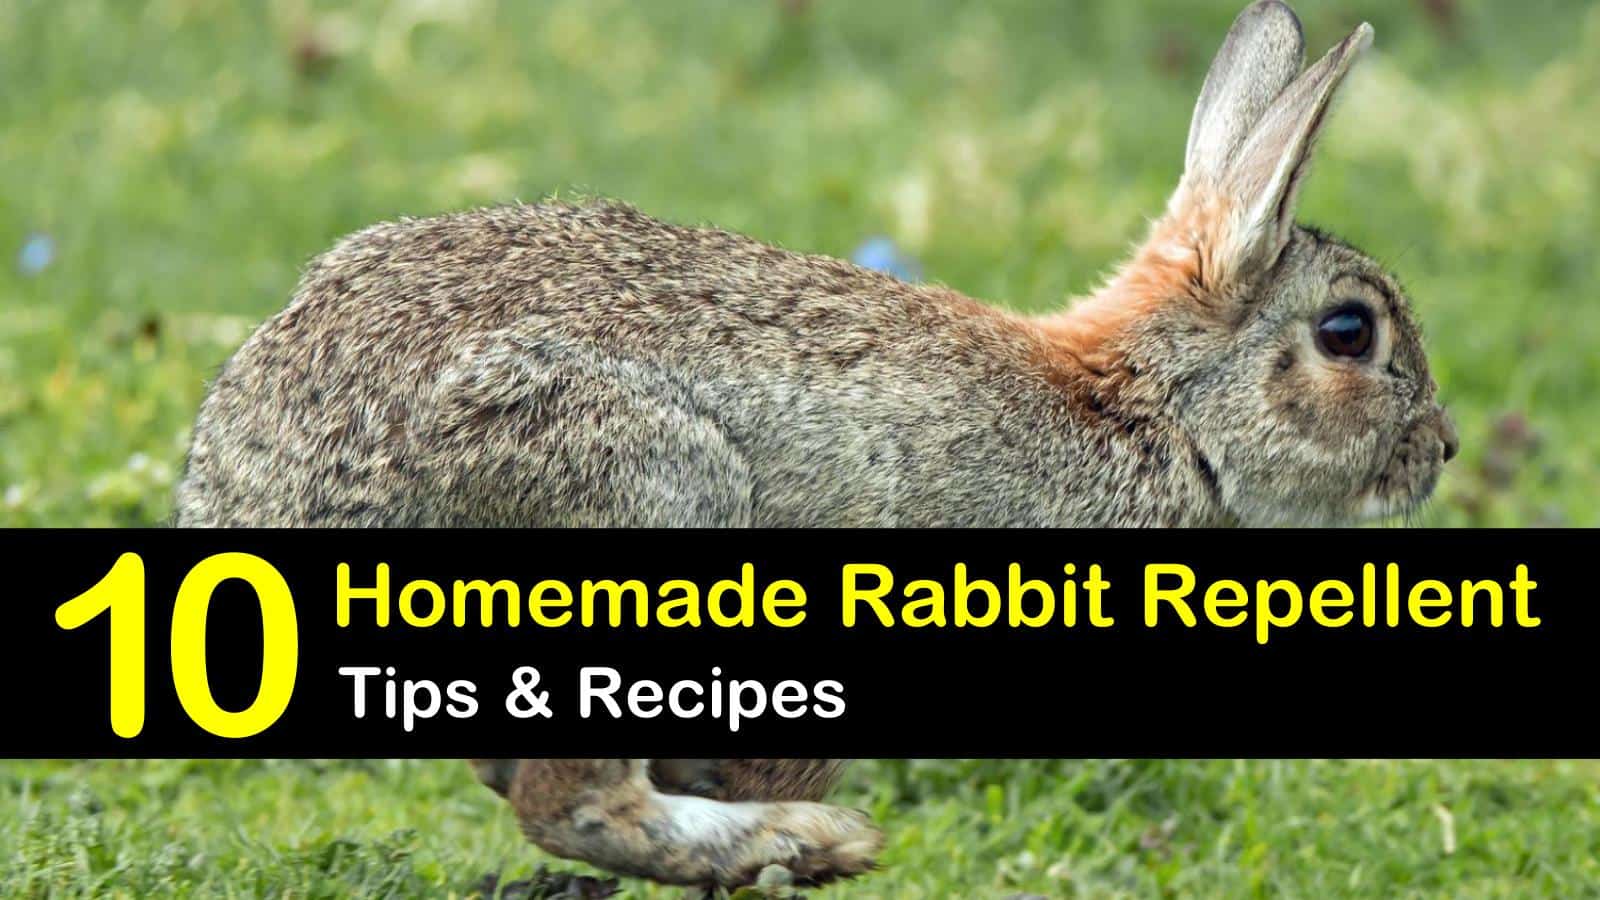 How To Make Homemade Rabbit Repellent 10 Scents That Rabbits Hate And How To Use Them Pest